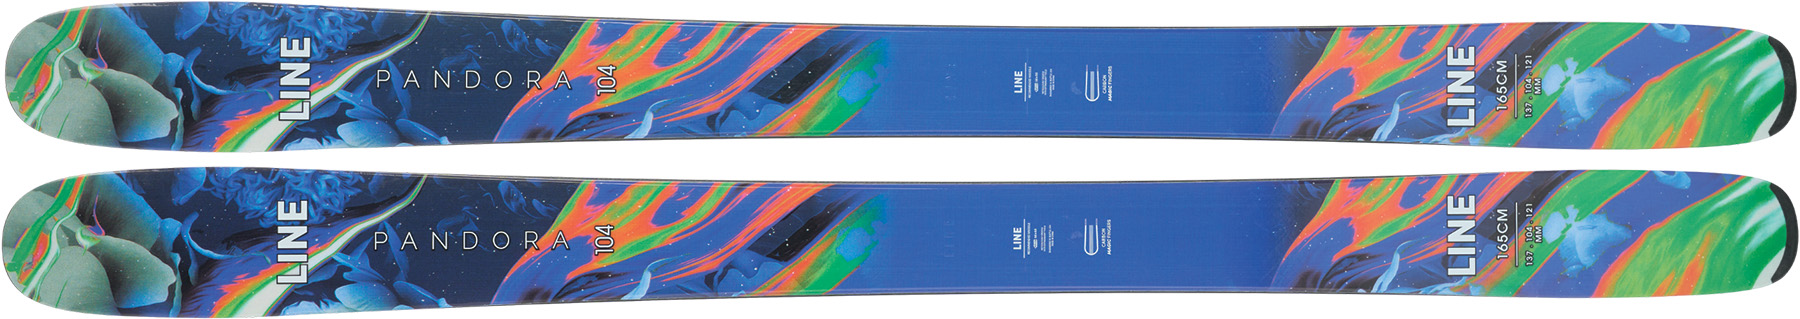 2023-2024 Blister reviewer ski-quiver selections